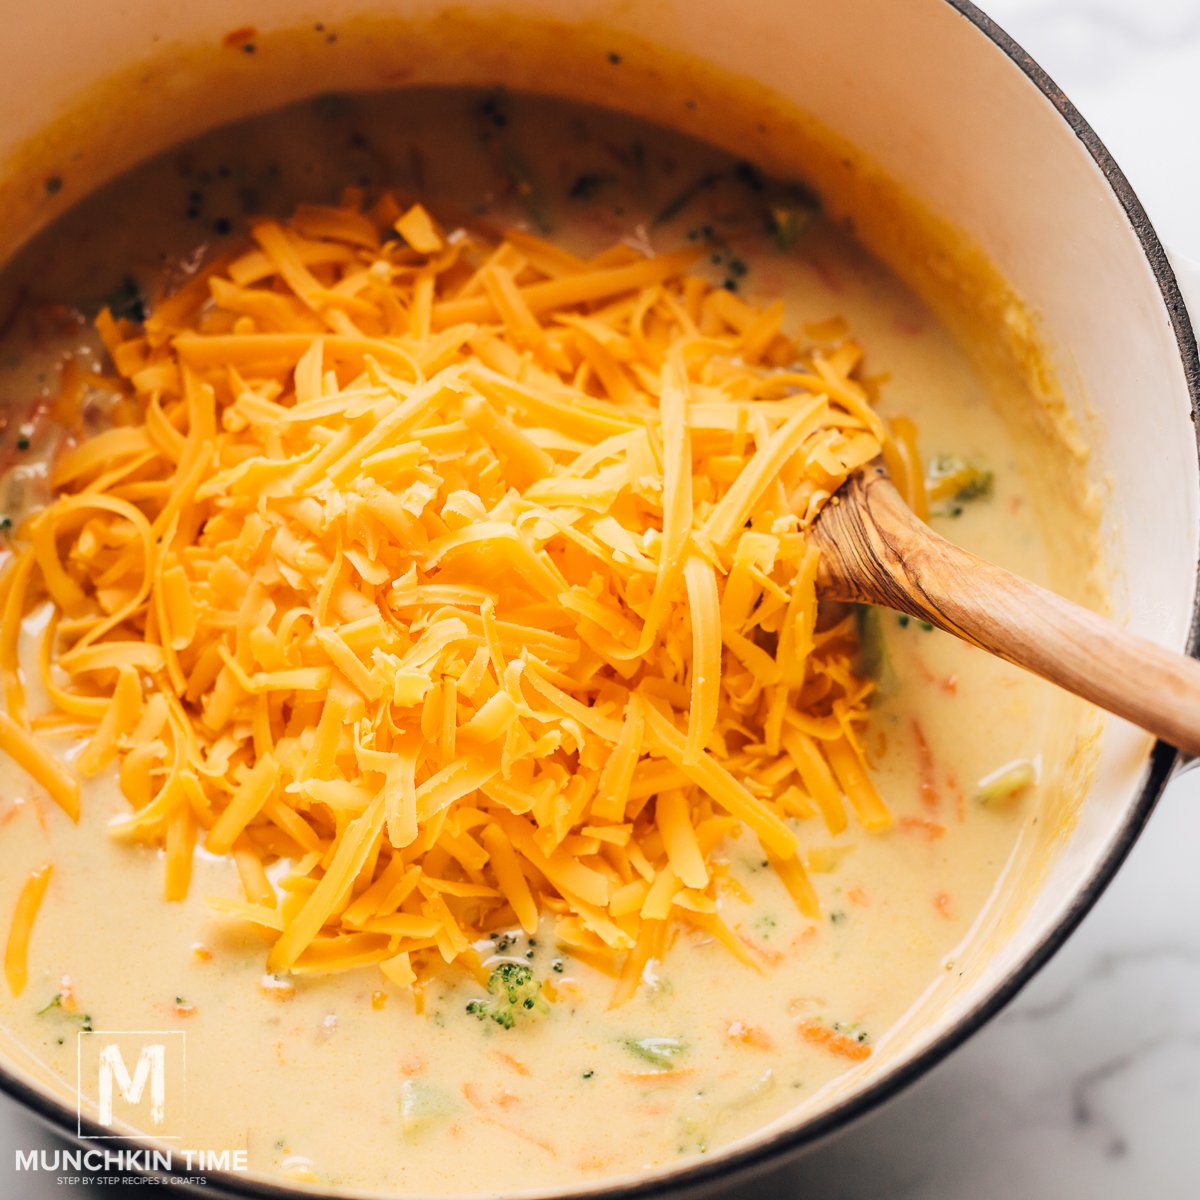 How to make Panera cheese soup